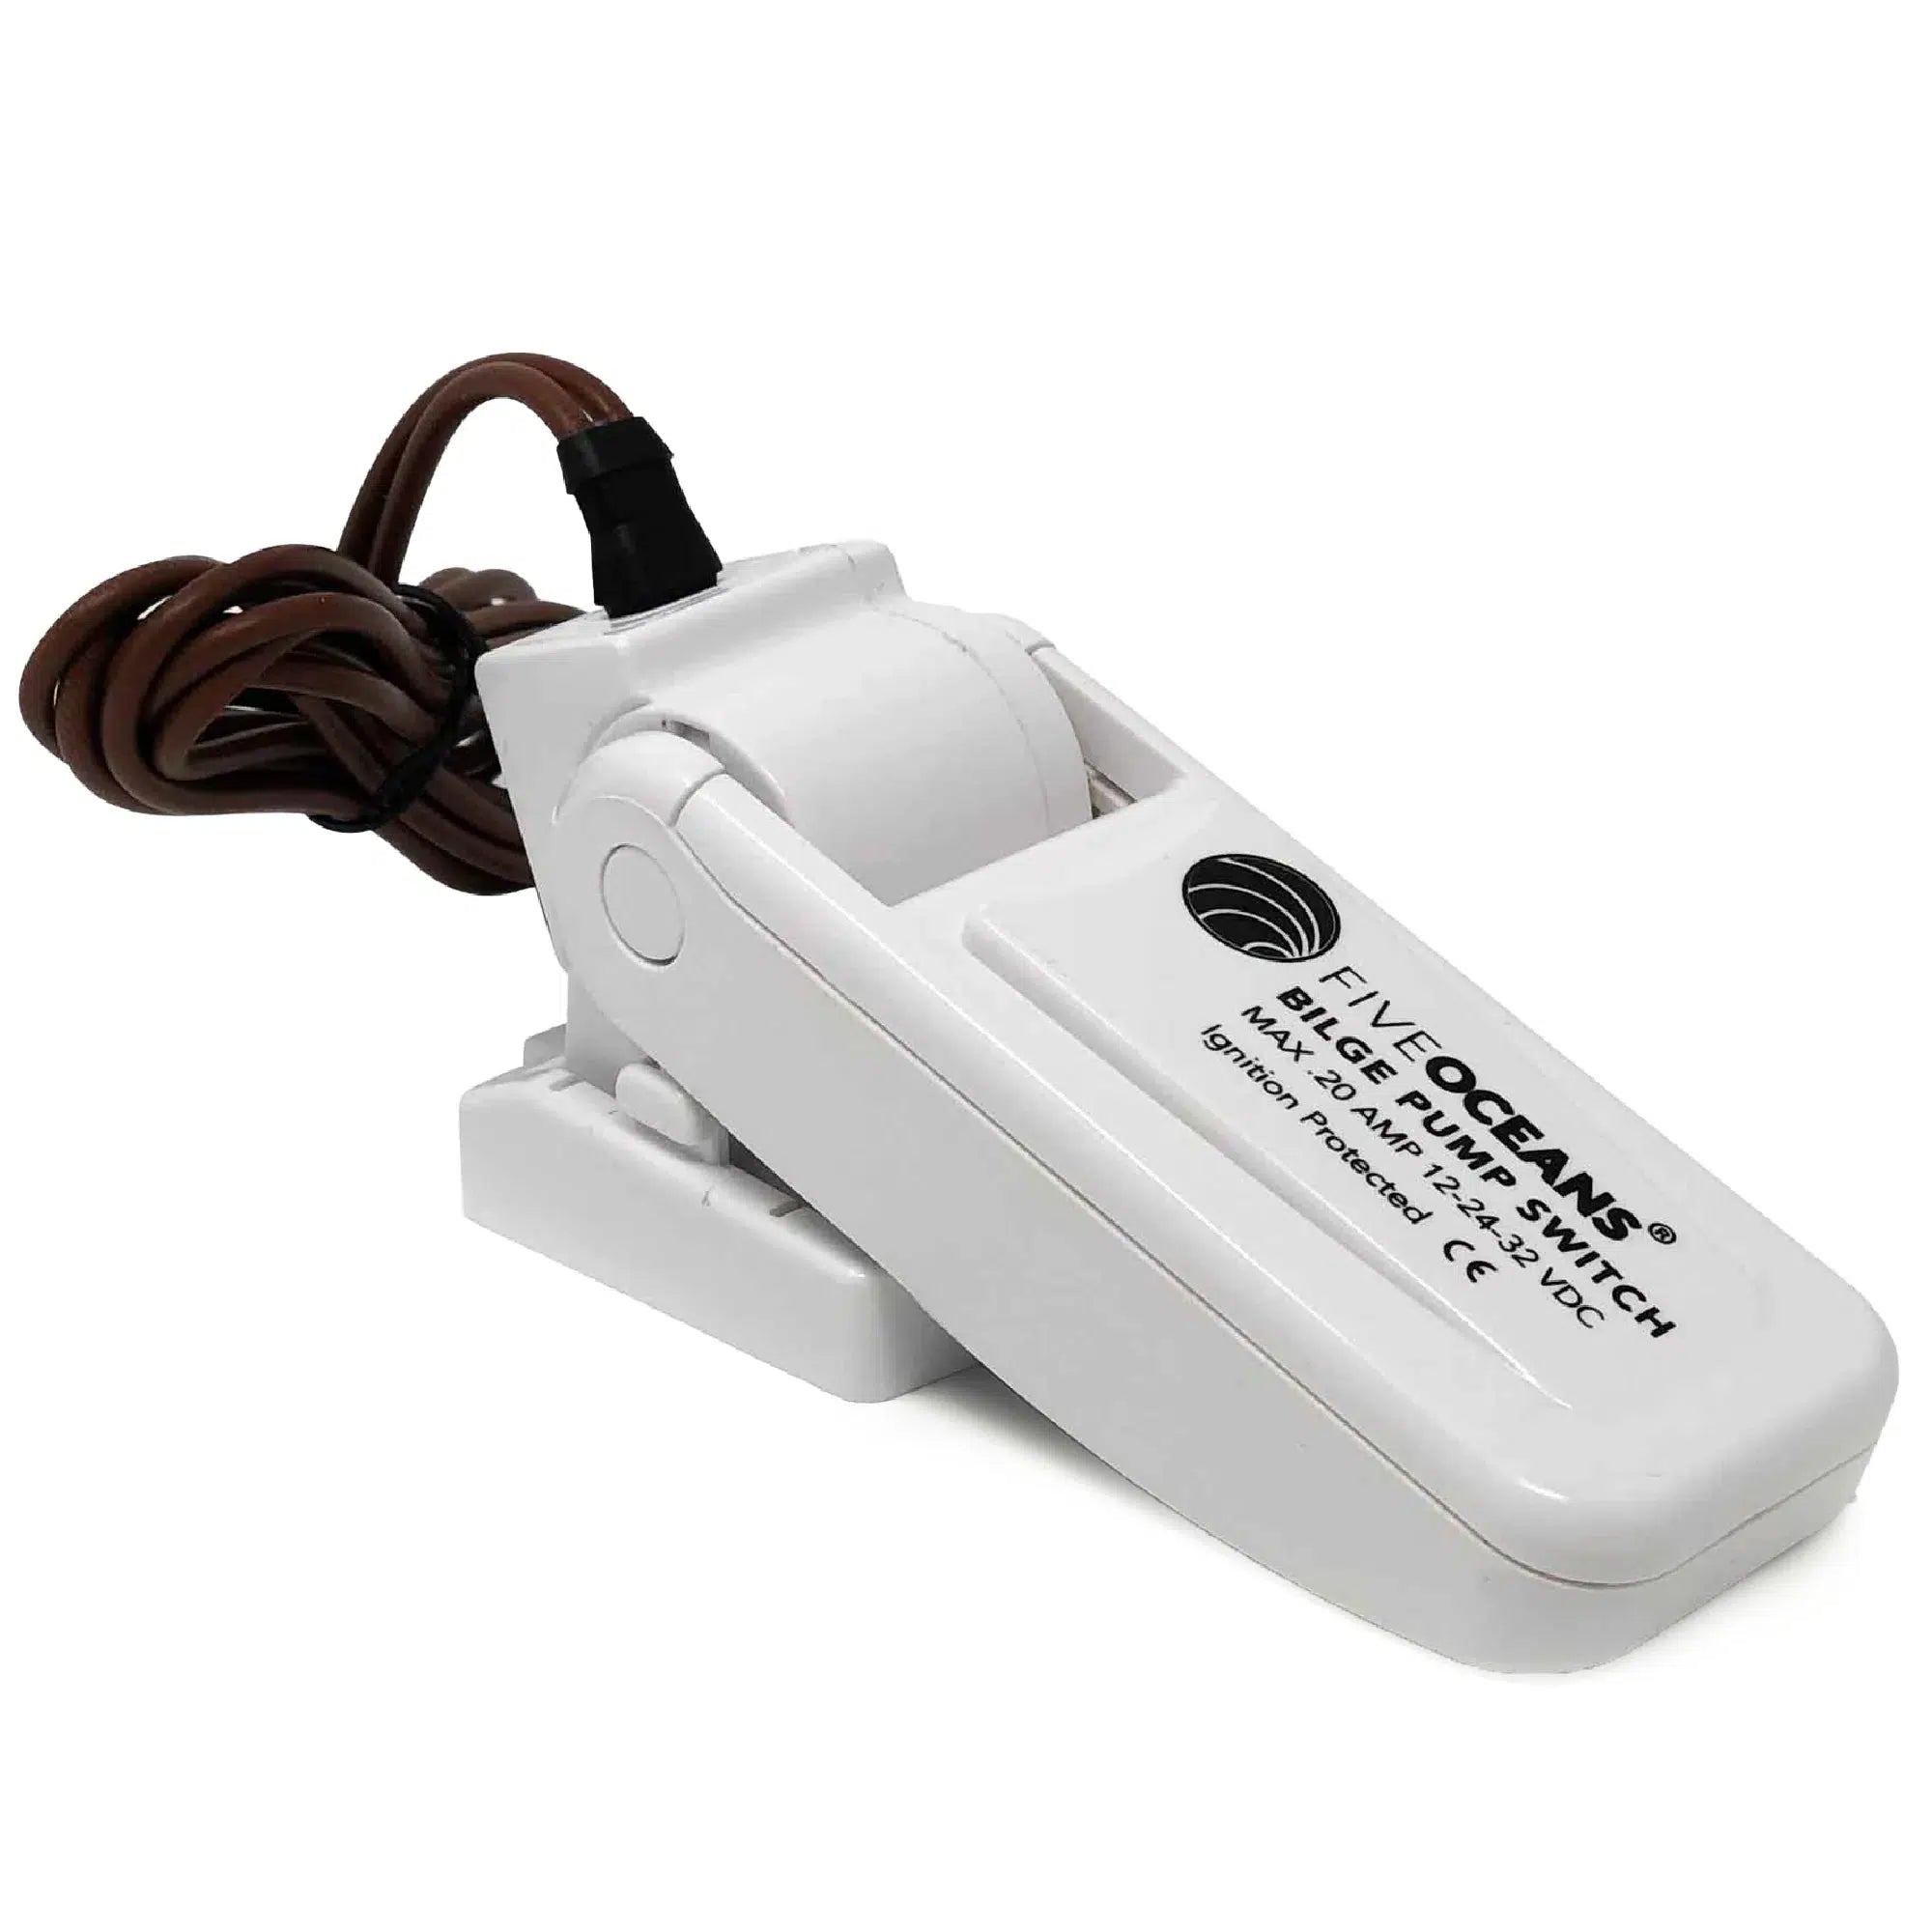 Self-Priming Dry Bilge Pump with On/Off Switch, 12V